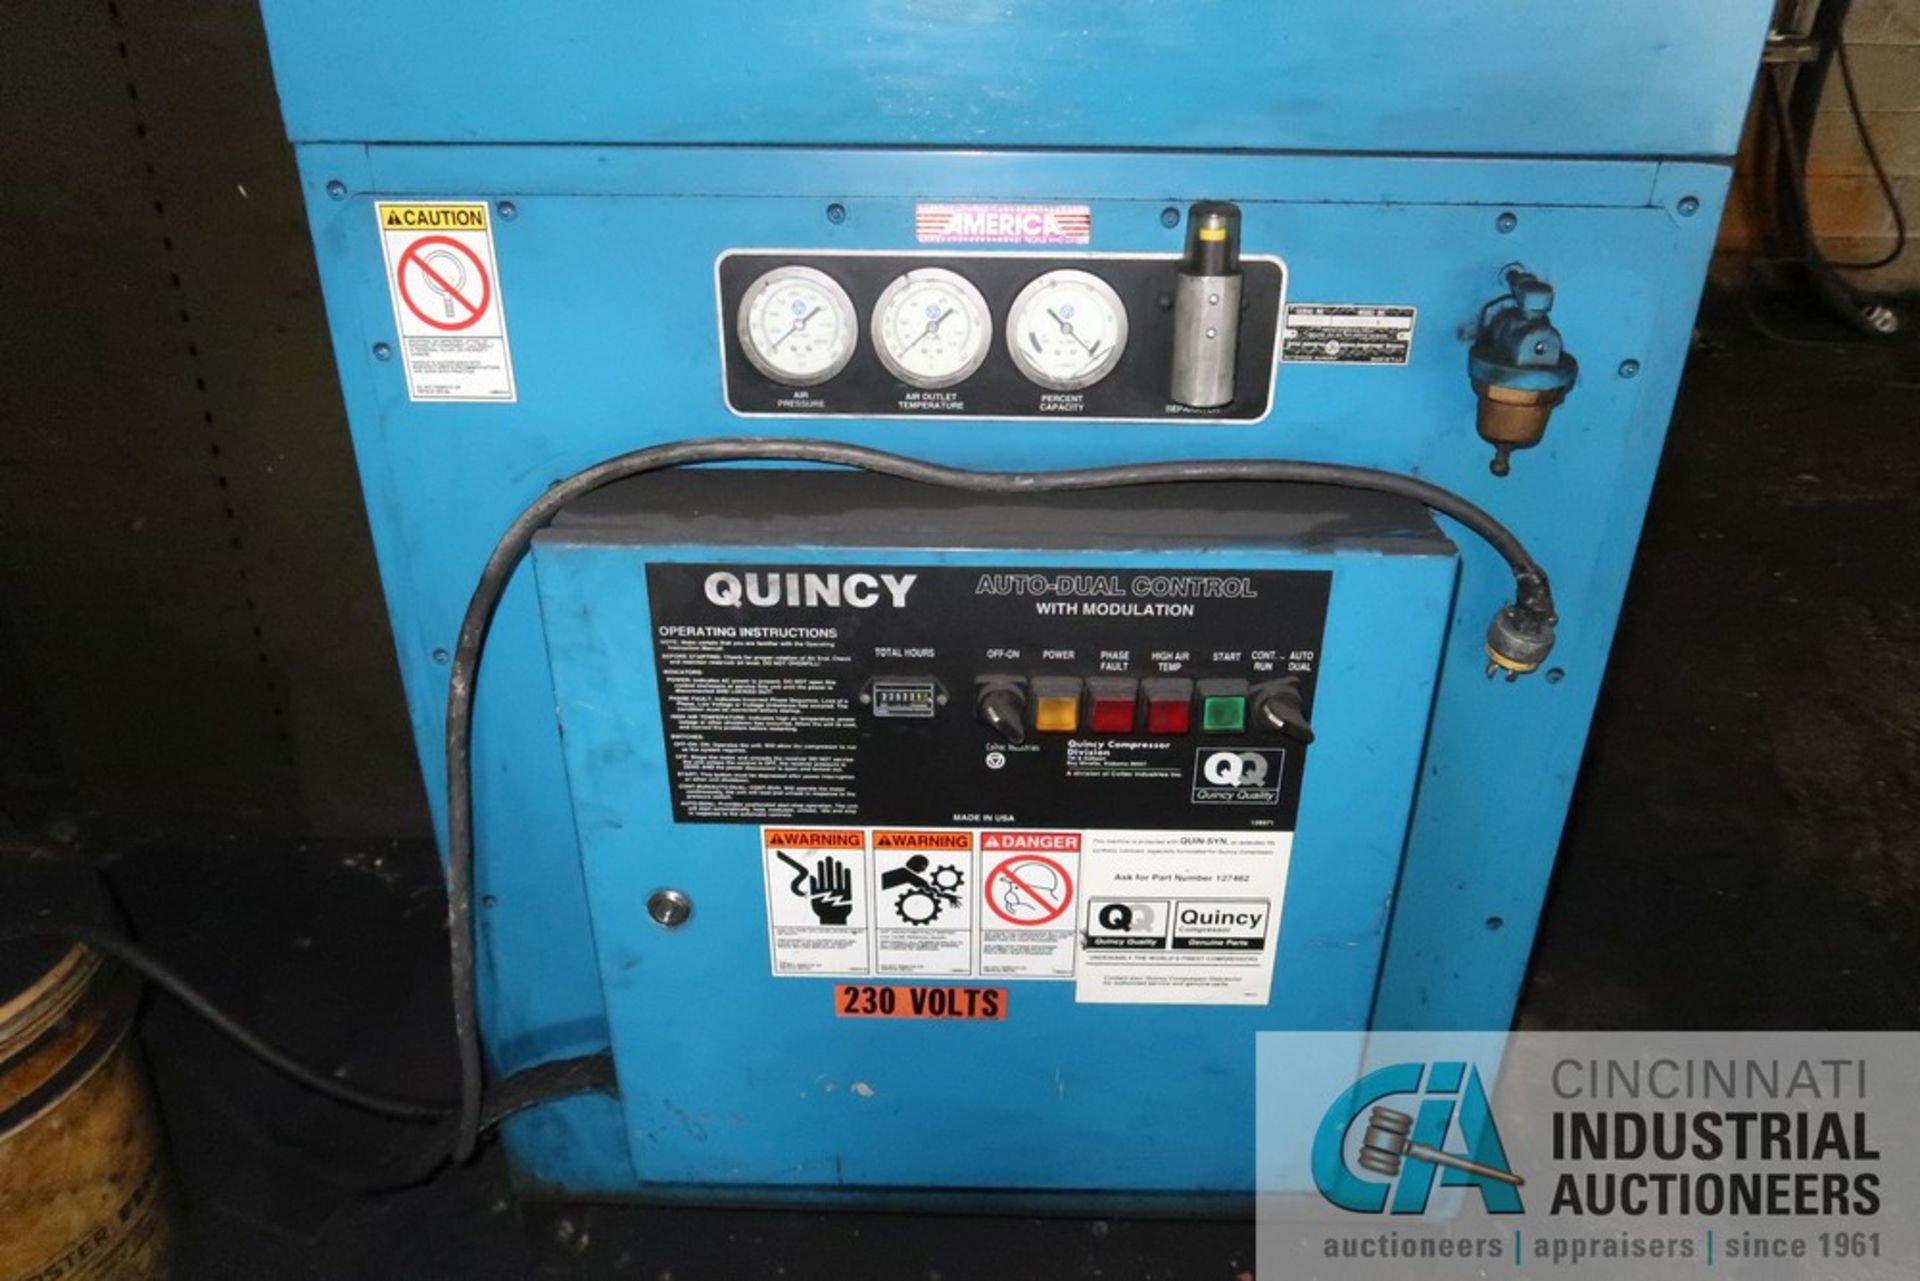 QUINCY AIR COMPRESSOR MODEL OMBCACA81B; S/N 82160, 223,221 HOURS, 230 VOLTS - Image 2 of 5